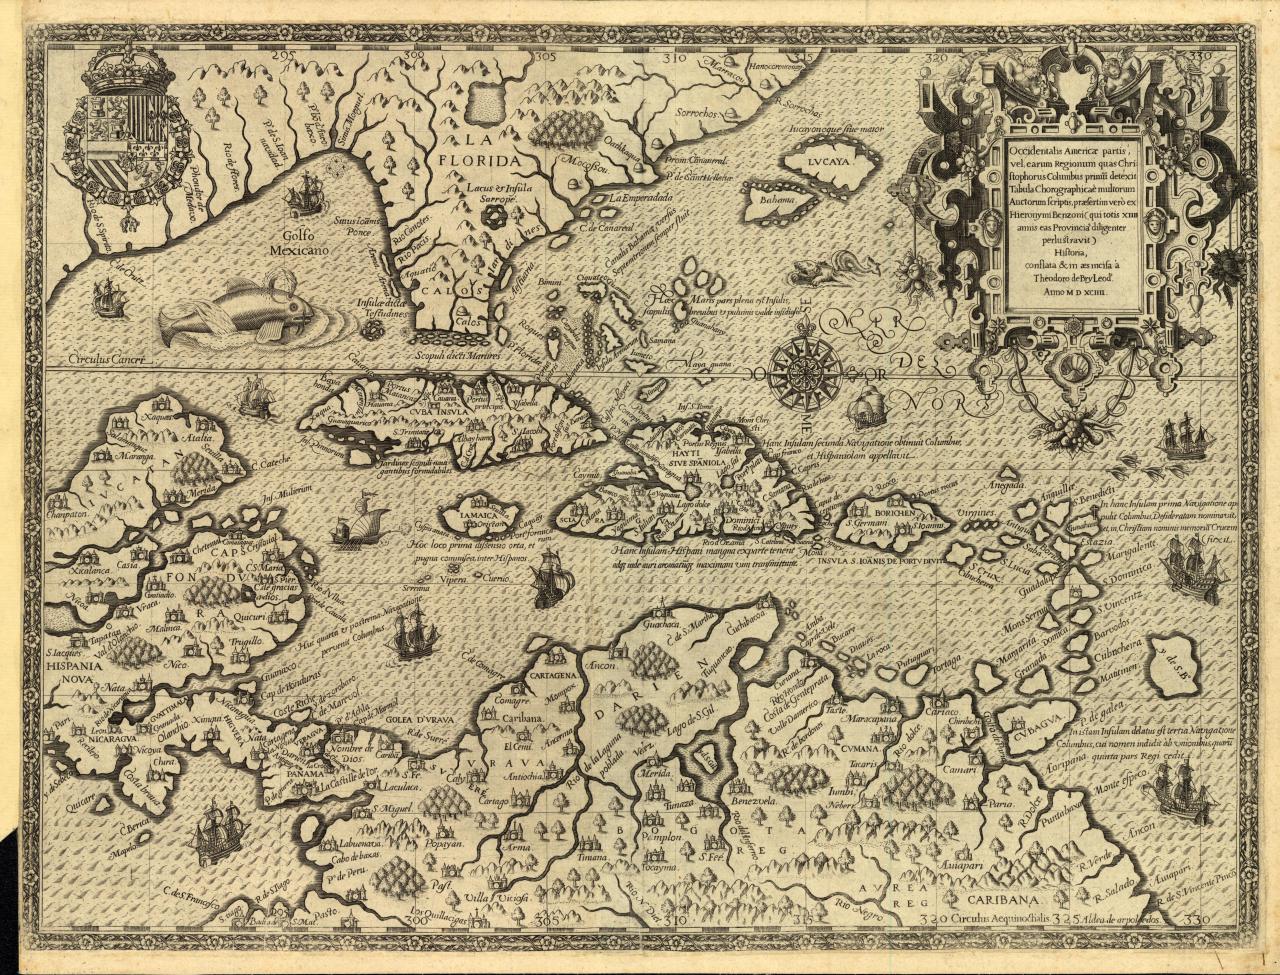 West Indies, 1594 - Maps on the Web